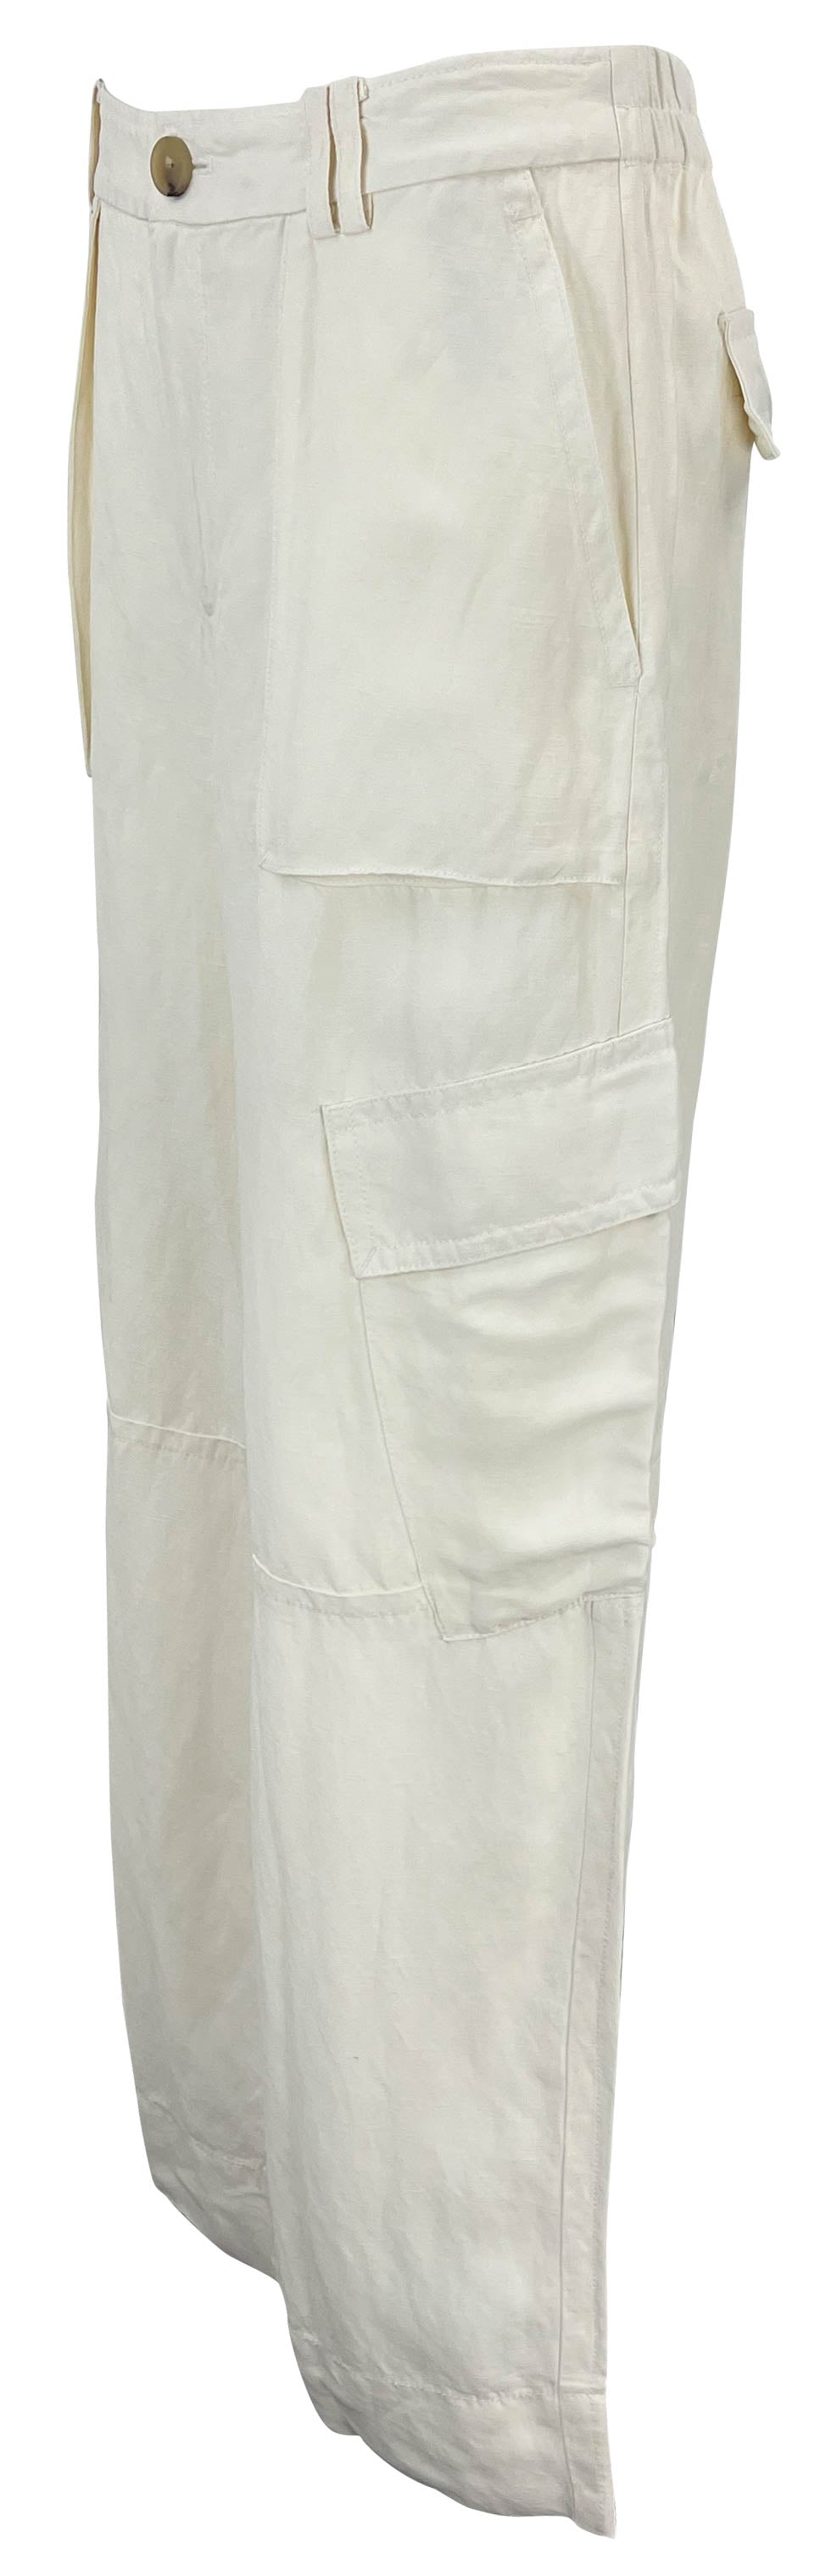 vince. Cargo Pants in Cream - Discounts on Vince. at UAL